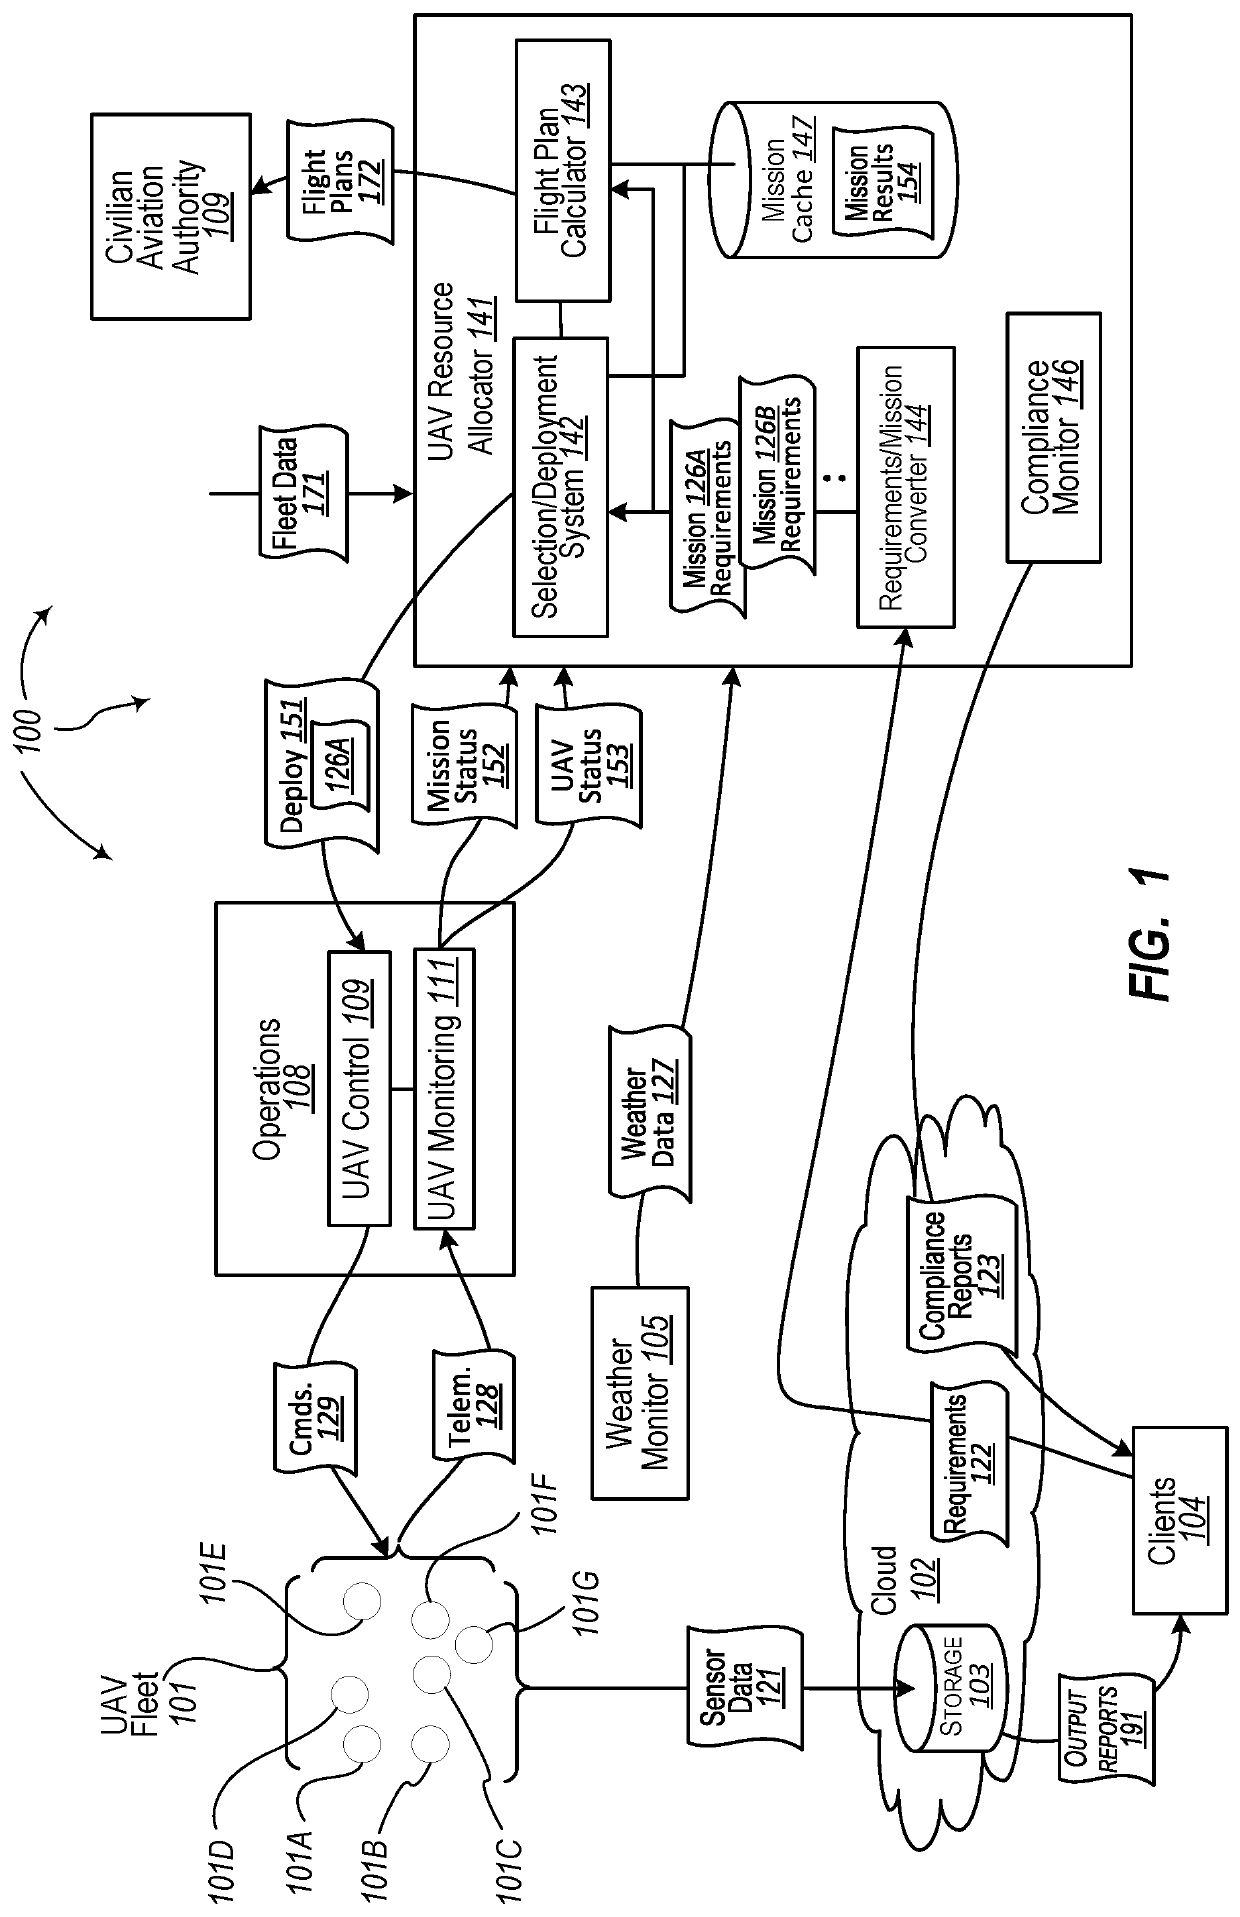 Optimized deployment of remotely operated aerial vehicle resources from a fleet to satisfy requests for remotely operated aerial vehicle resources